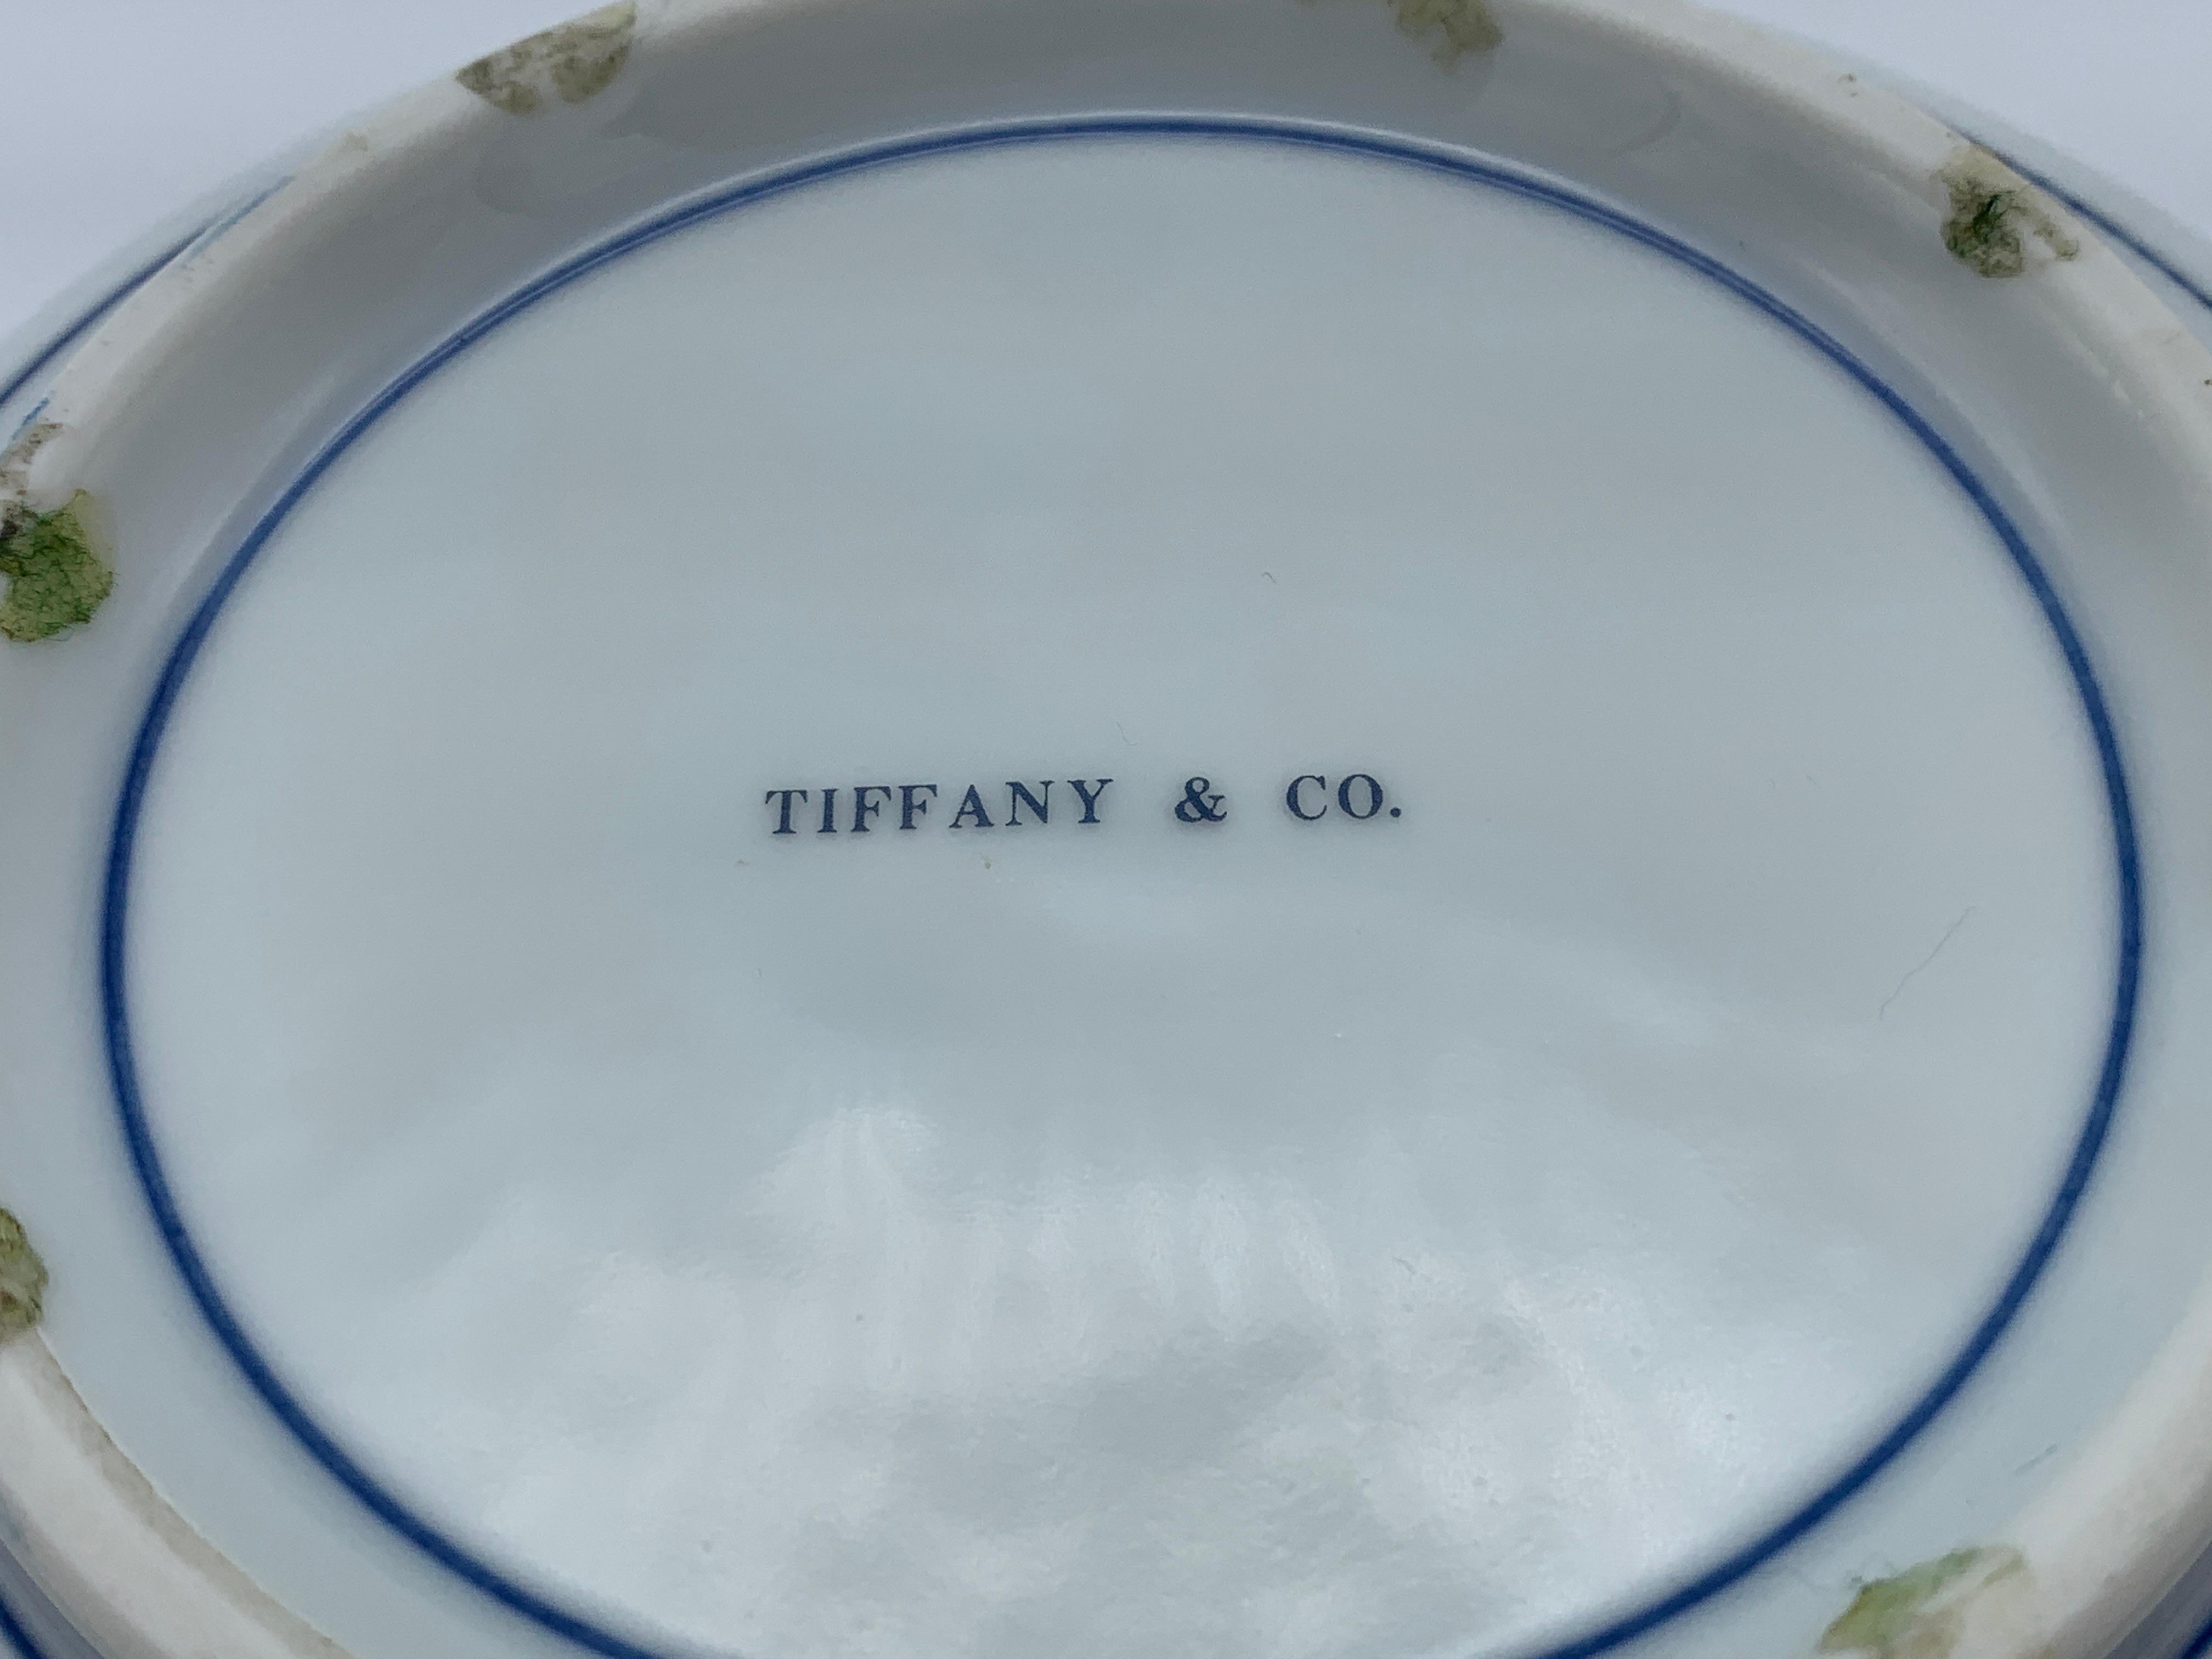 Porcelain 1970s Tiffany & Co. Chinoiserie Blue and White Imari-Style Catchall Bowl